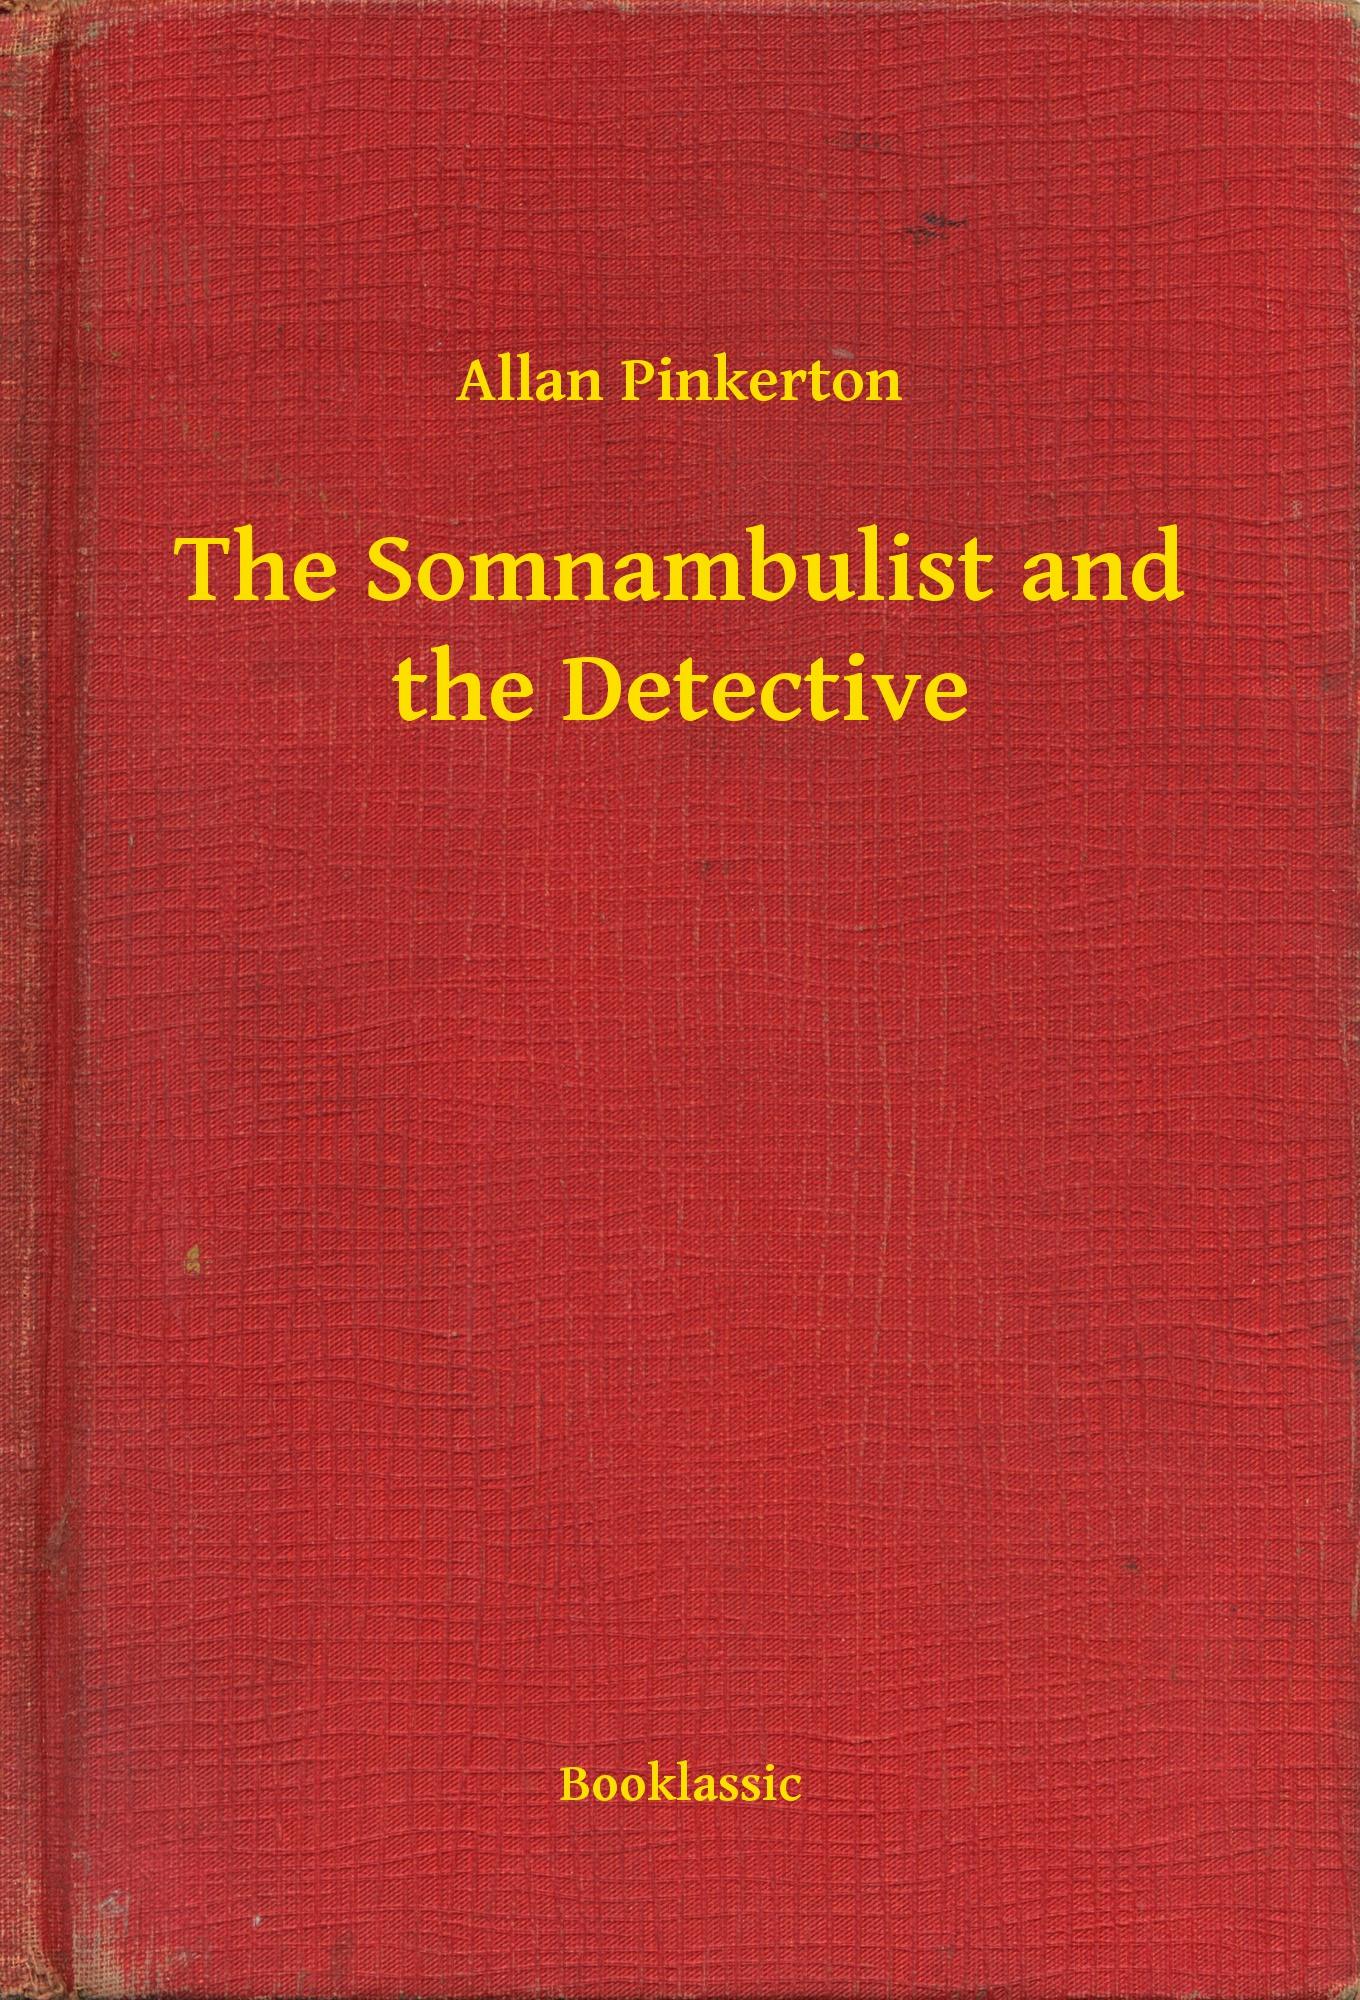 The Somnambulist and the Detective - Allan Pinkerton